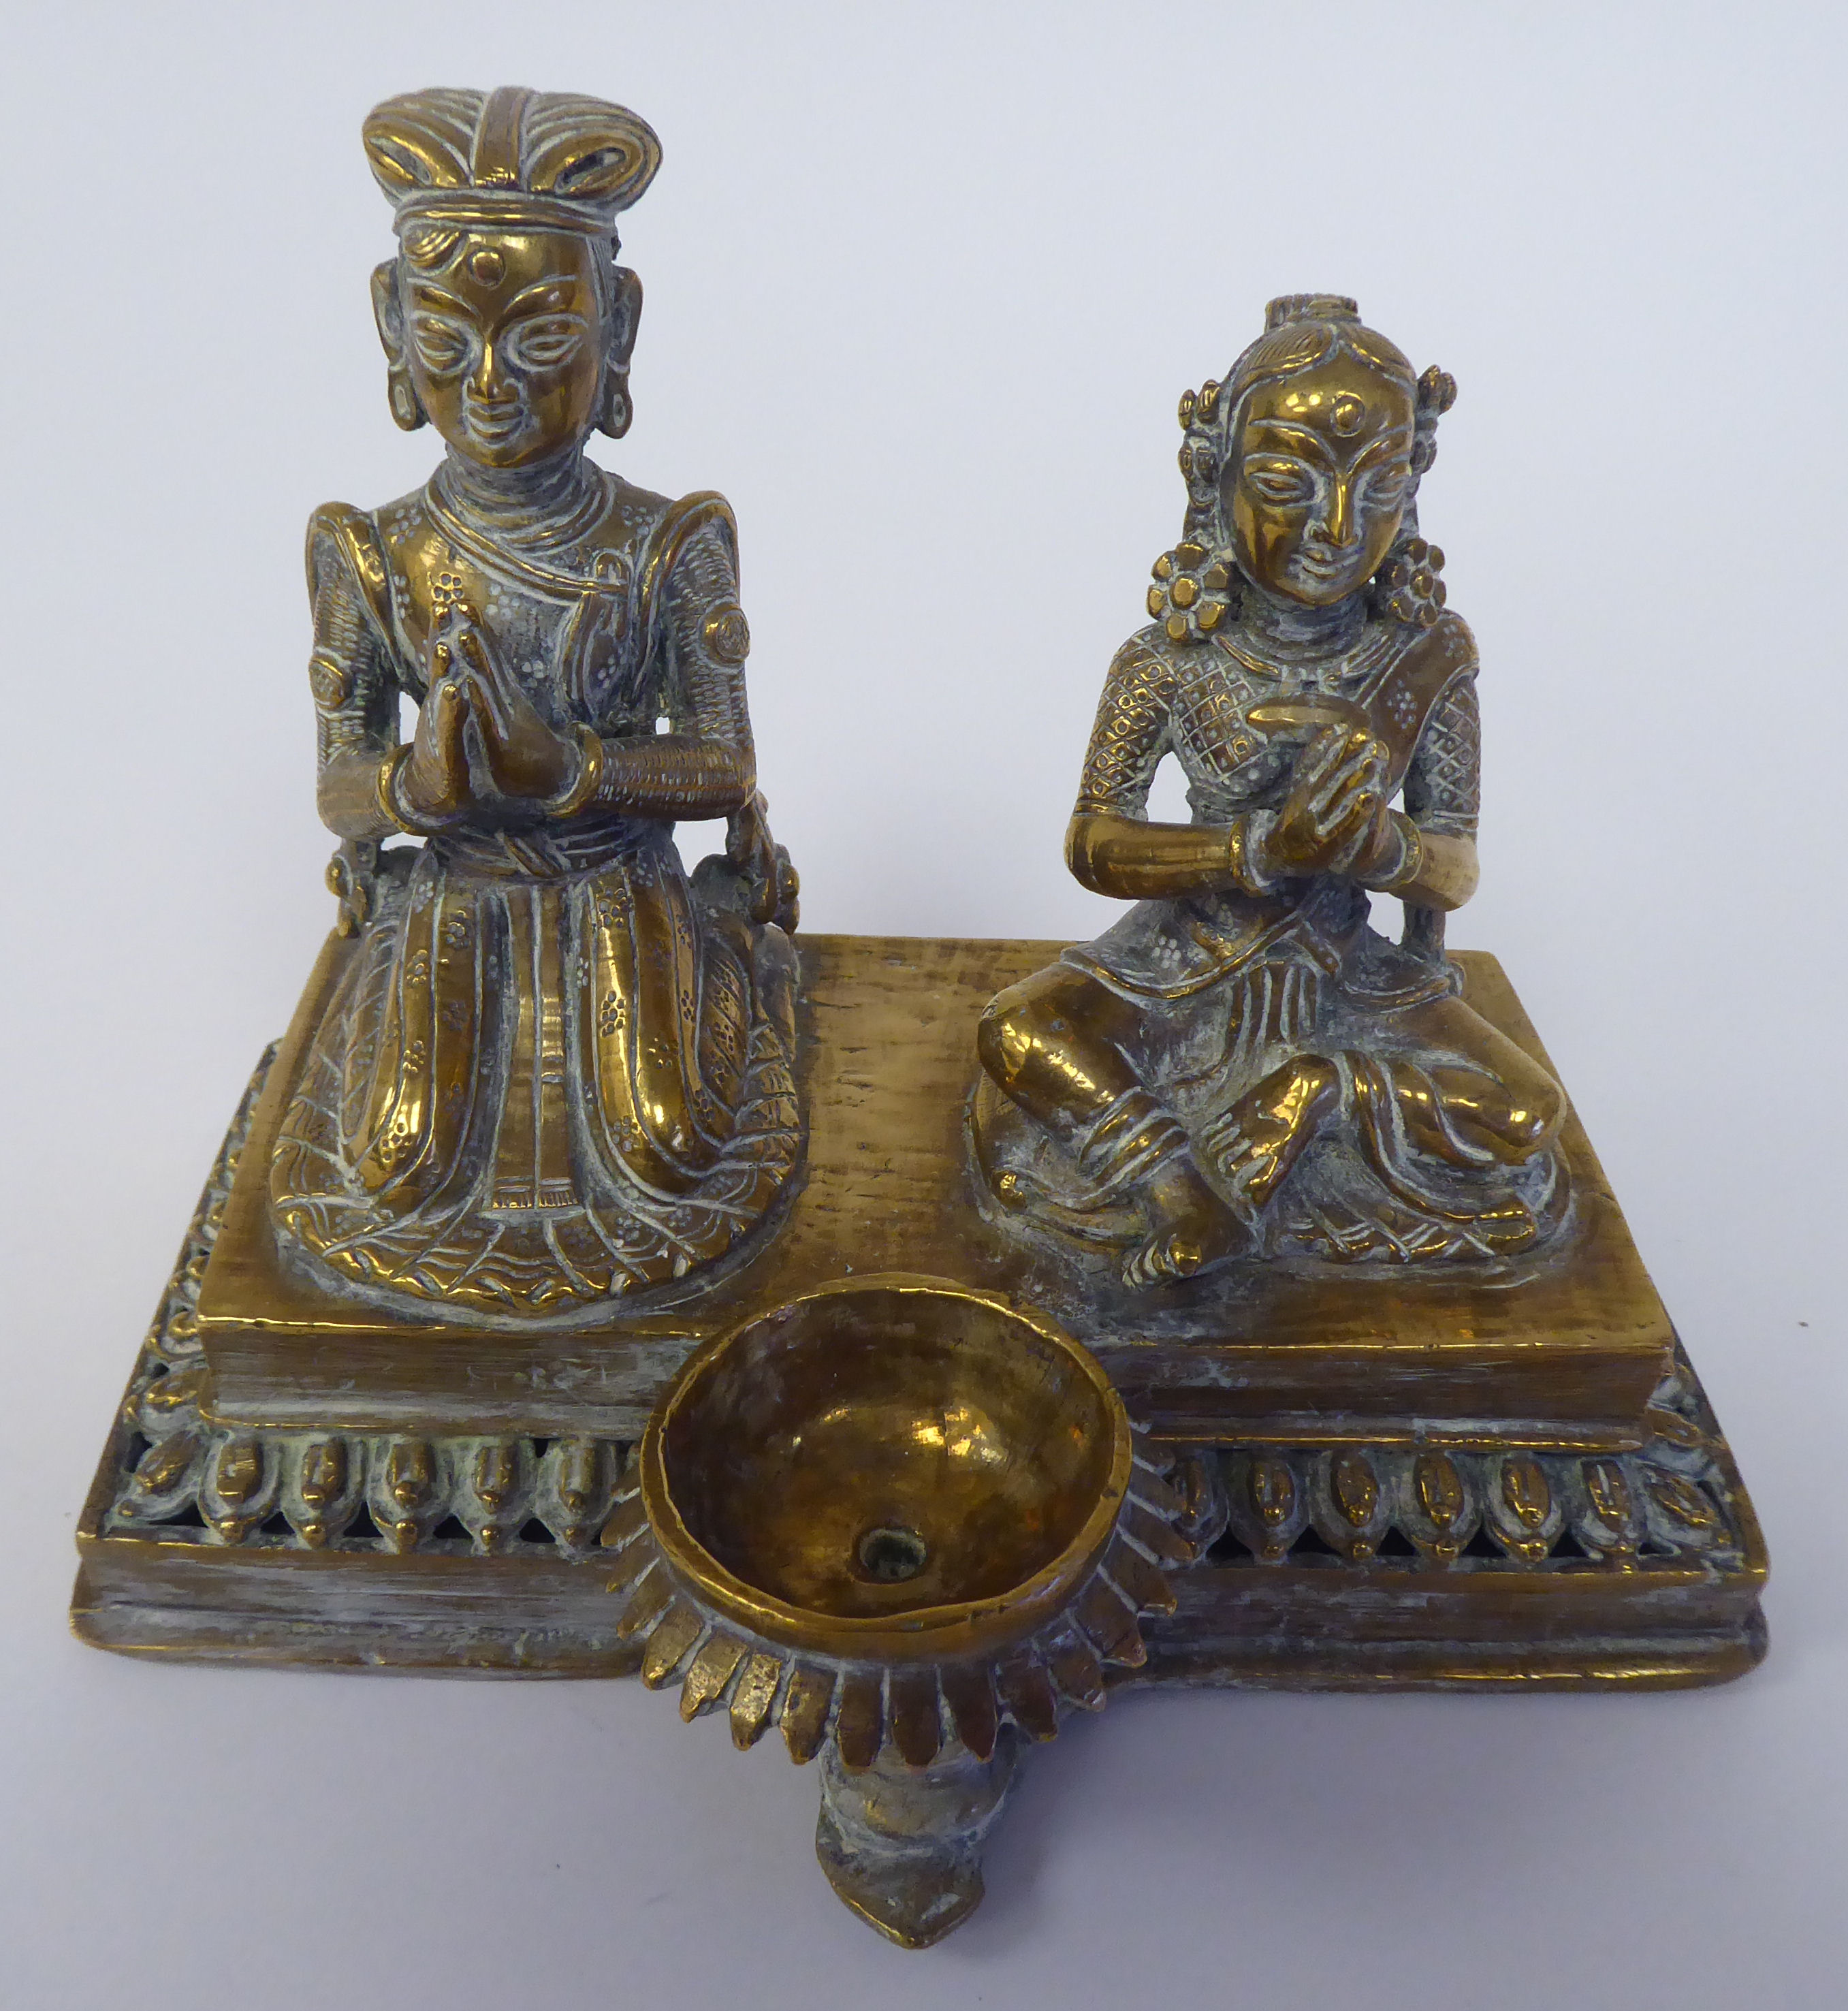 A pair of Asian brass religious deities, seated on a plinth between an outset pedestal vase  5"h